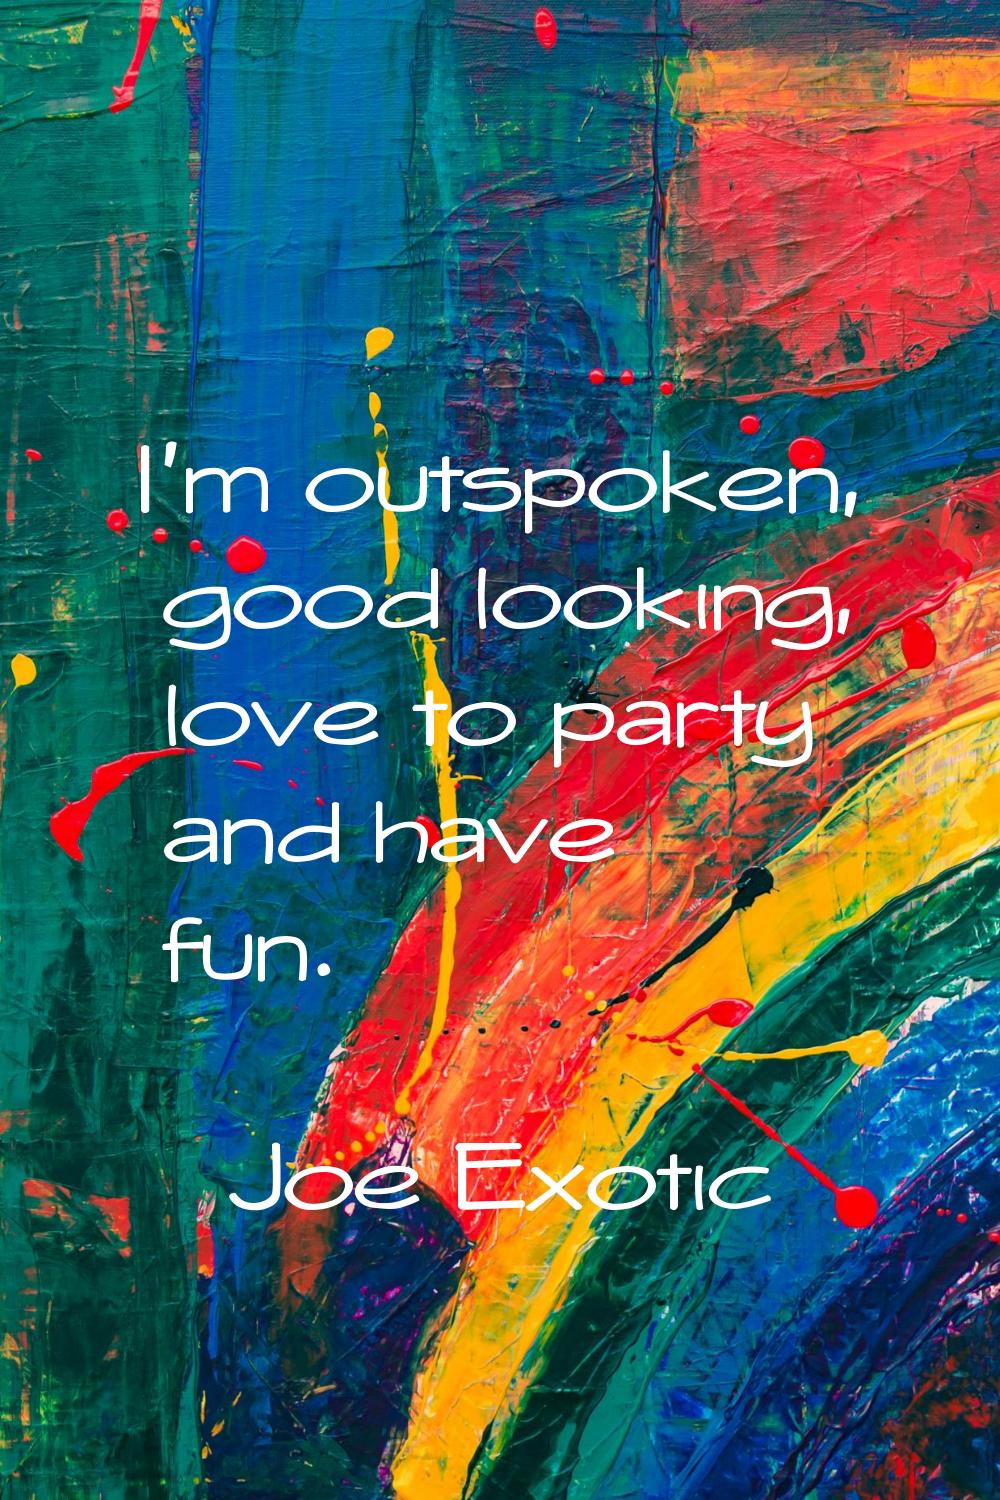 I'm outspoken, good looking, love to party and have fun.